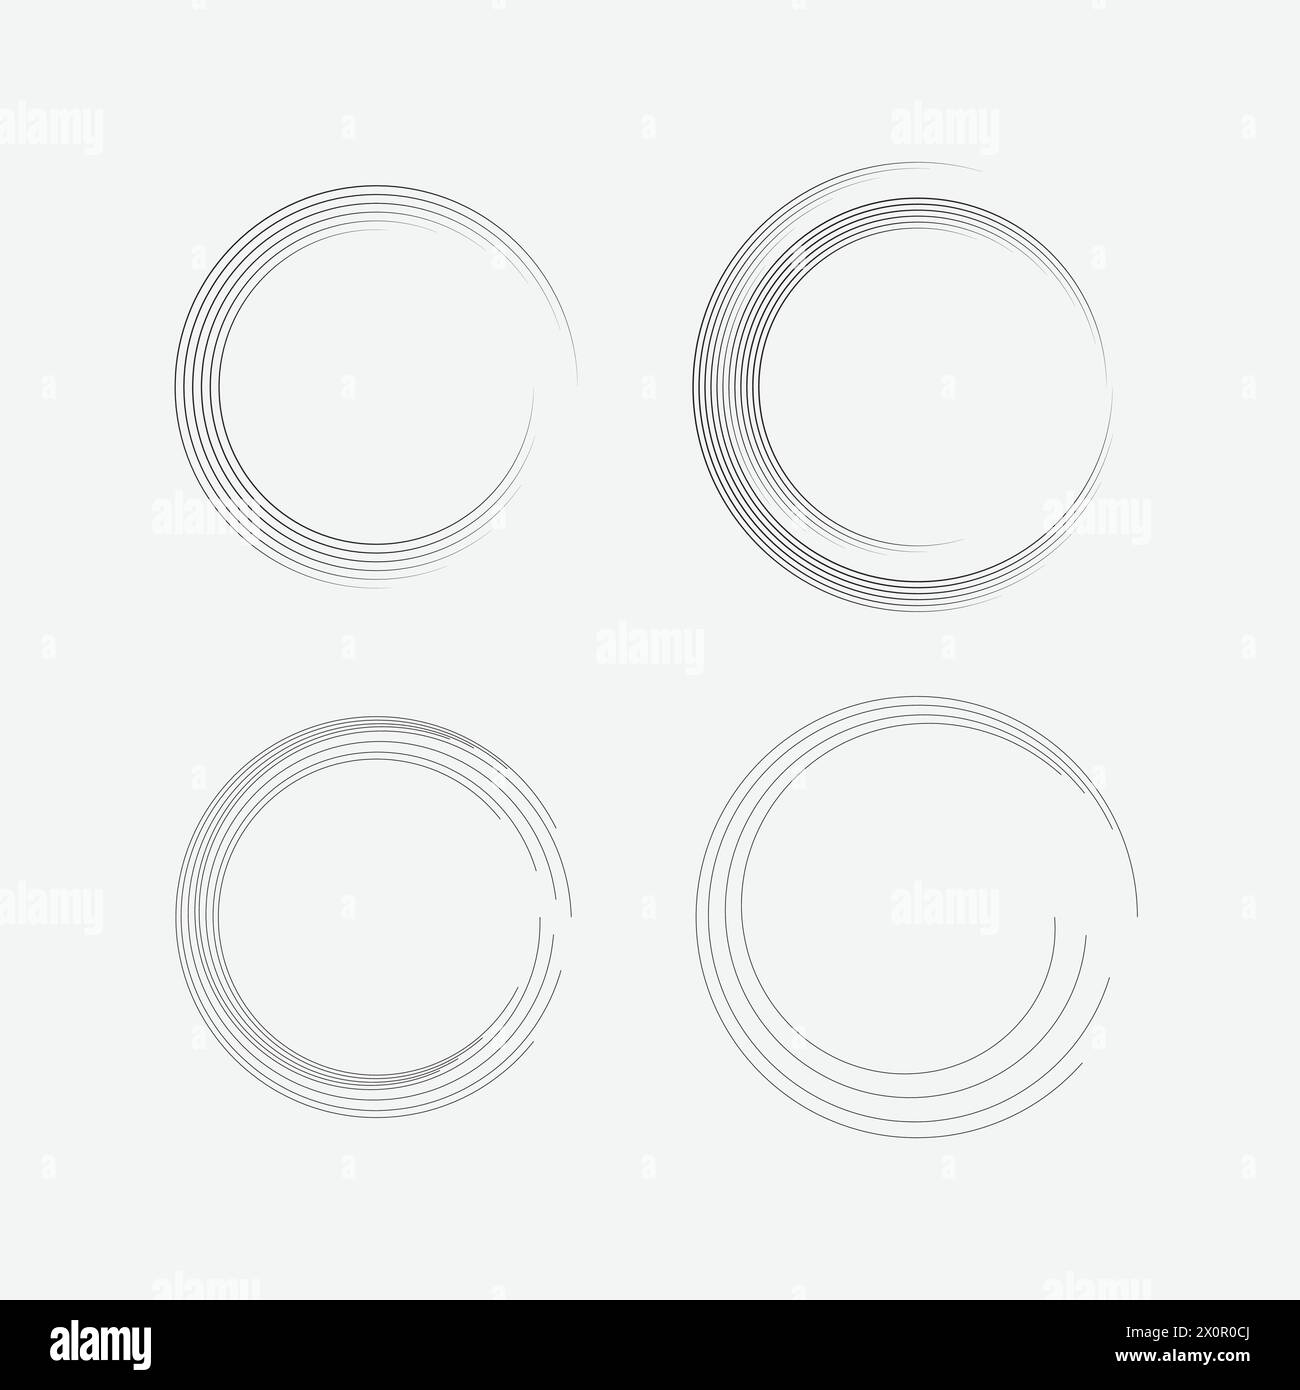 Set of black thick speed lines. Speed lines in circle form. Geometric art. Design element for logo, tattoo, web pages, template, abstract vector backg Stock Vector